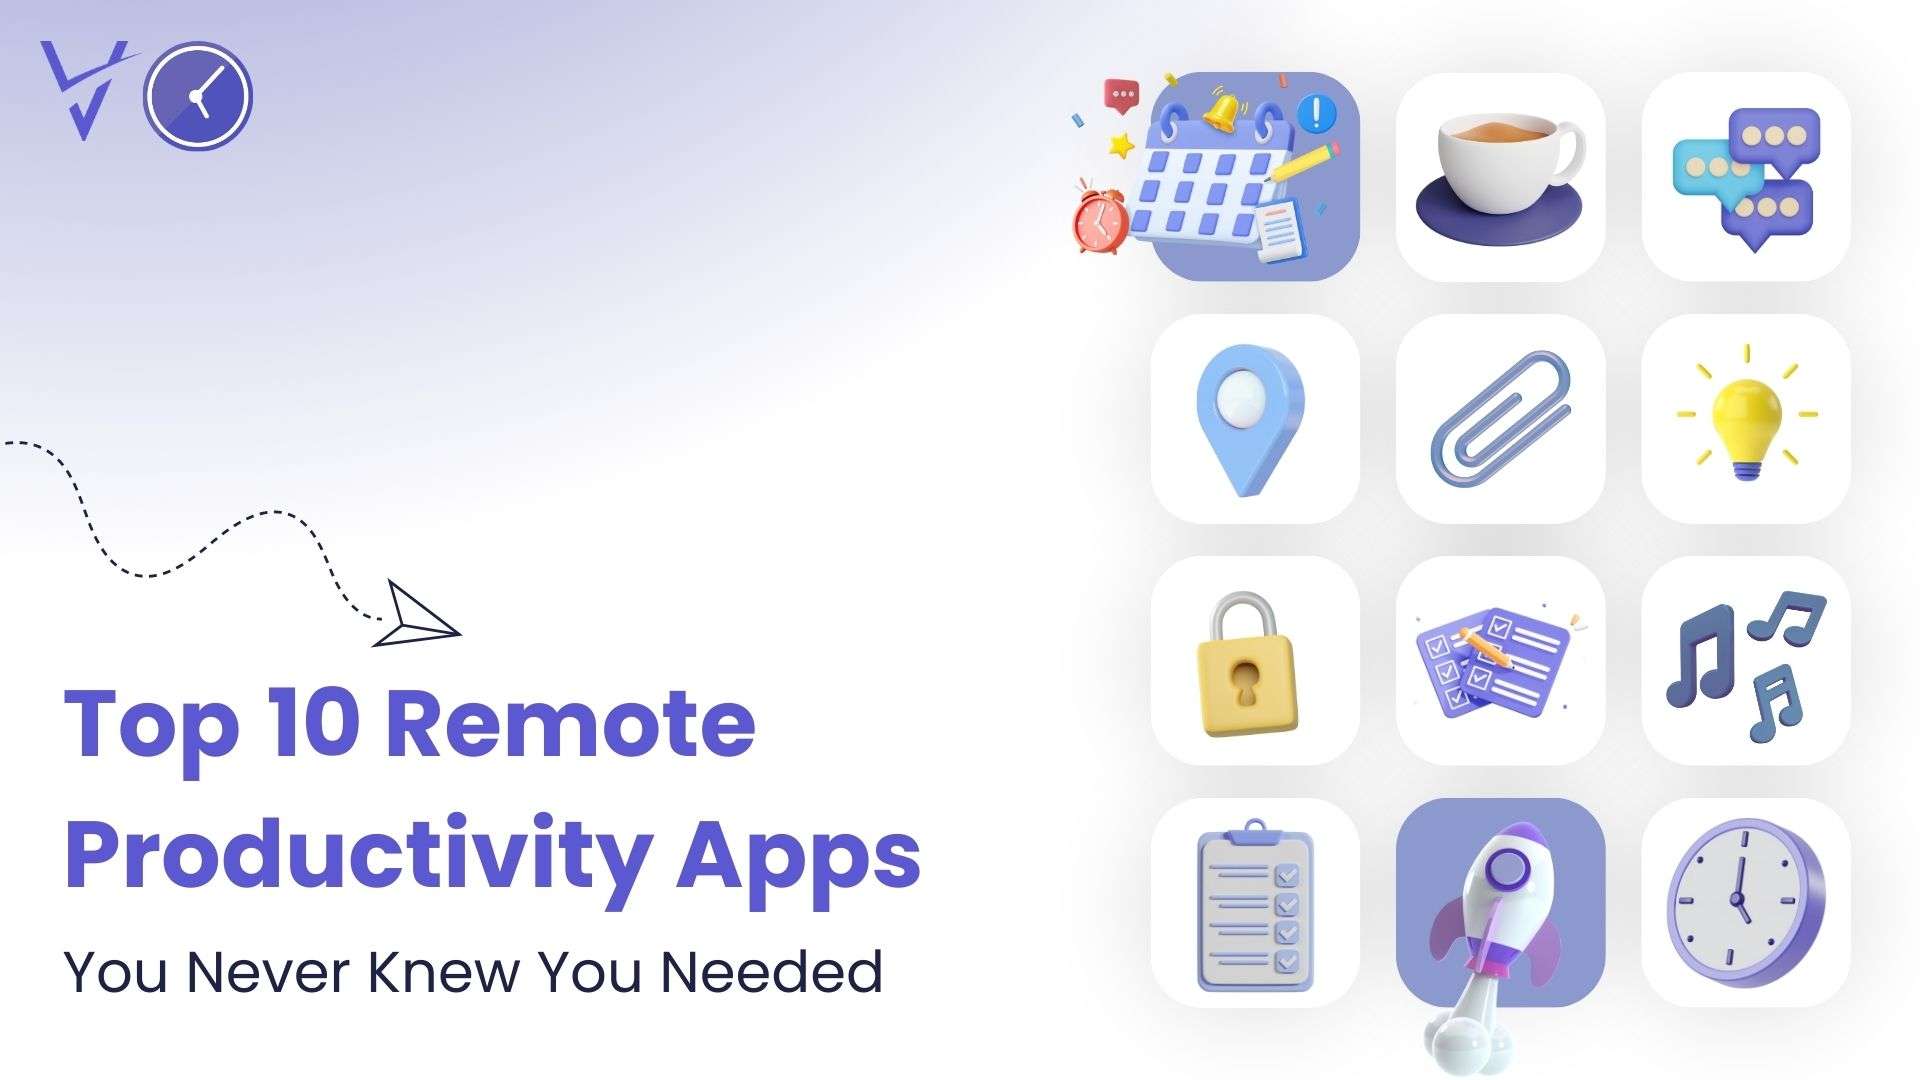 Top 10 Remote Productivity Apps You Never Knew You Needed